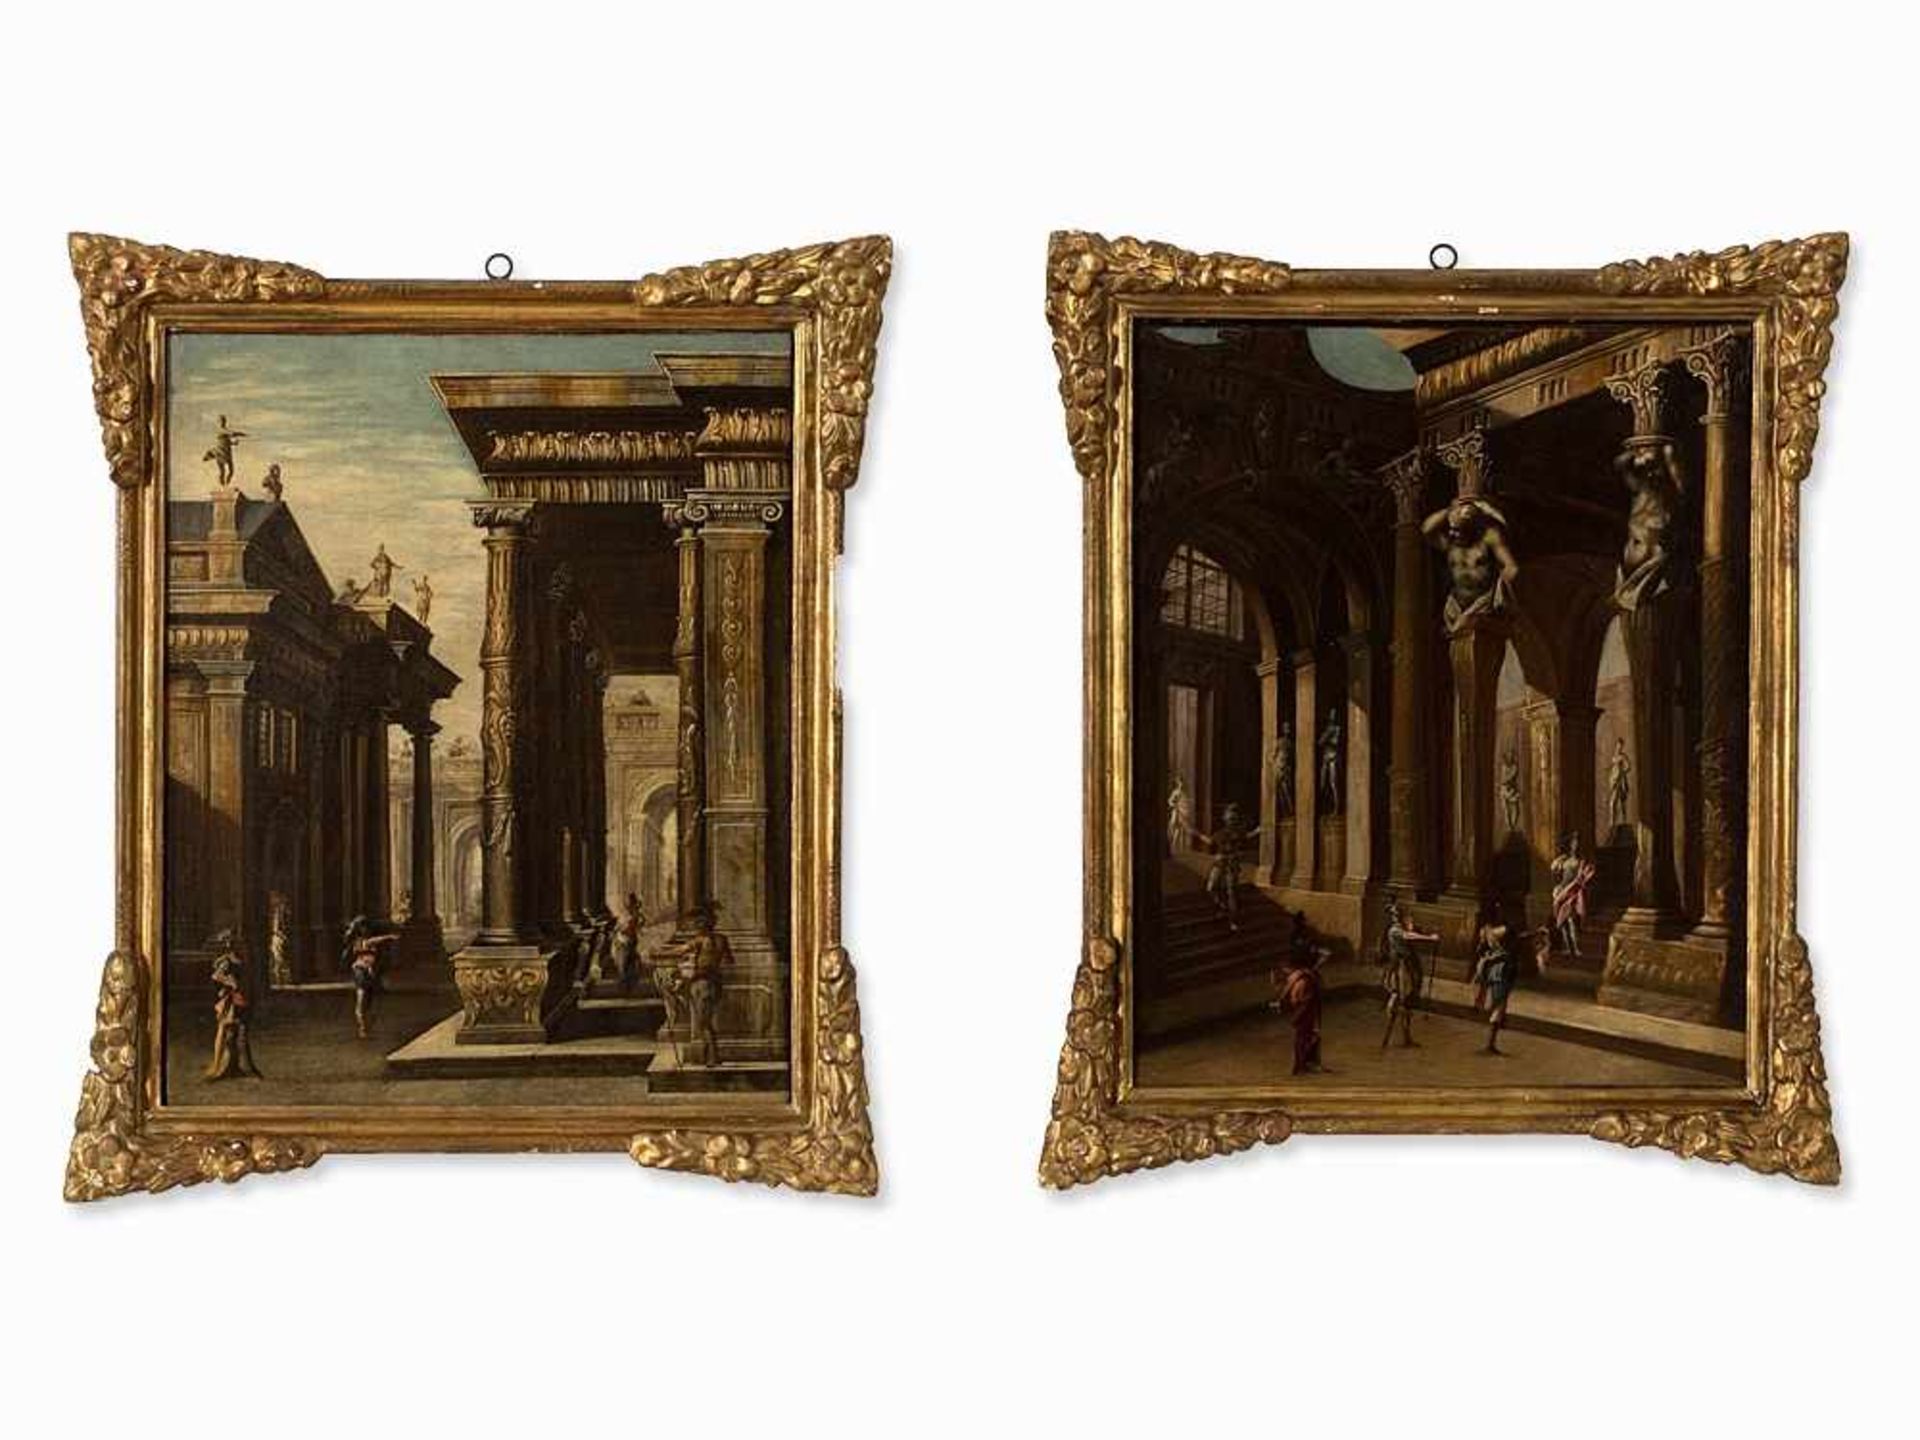 Italian School, Two Architectural Capricci, Oil, 17th C. Oil on canvas, relined Italy, 17th